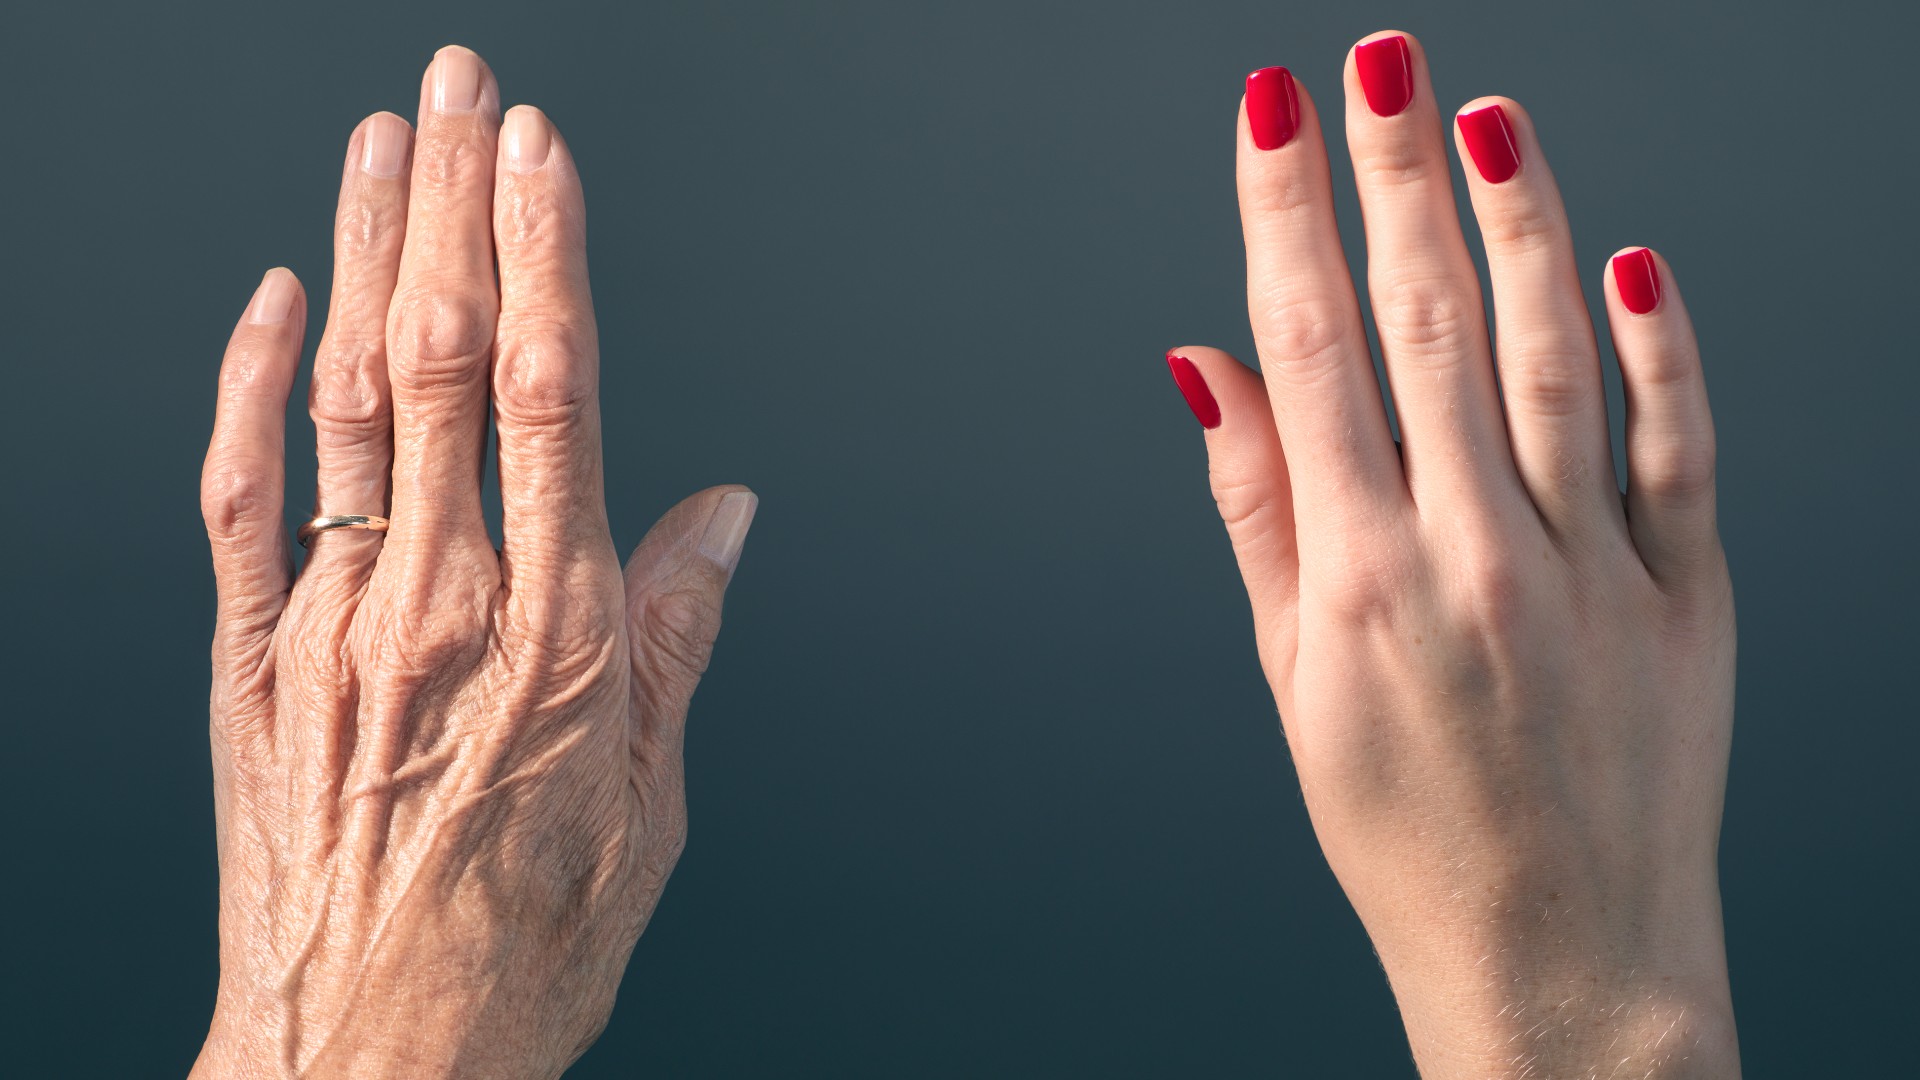 Picture of an elderly woman's hand beside a younger woman's hand.  Peter Finch via Getty Images